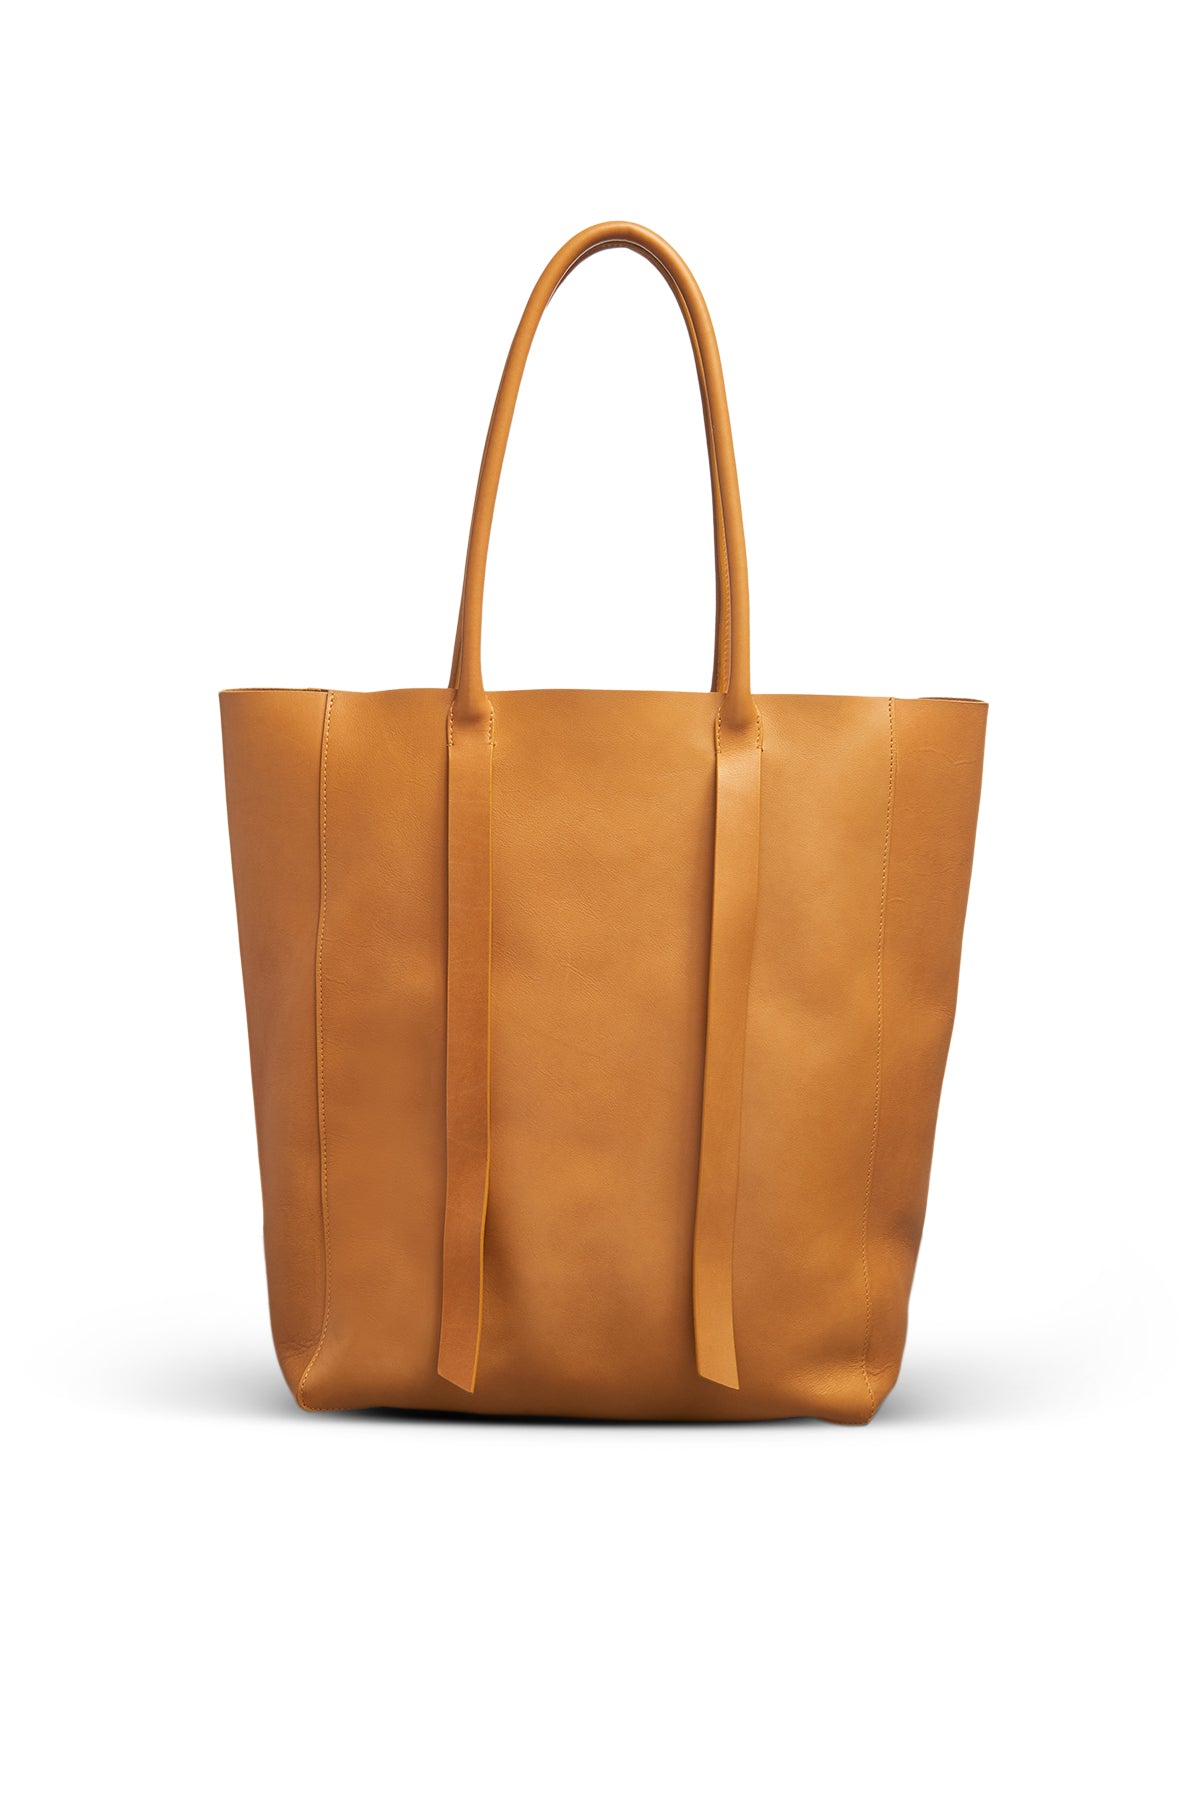 Marianne Tote Bag in Golden Birch Leather